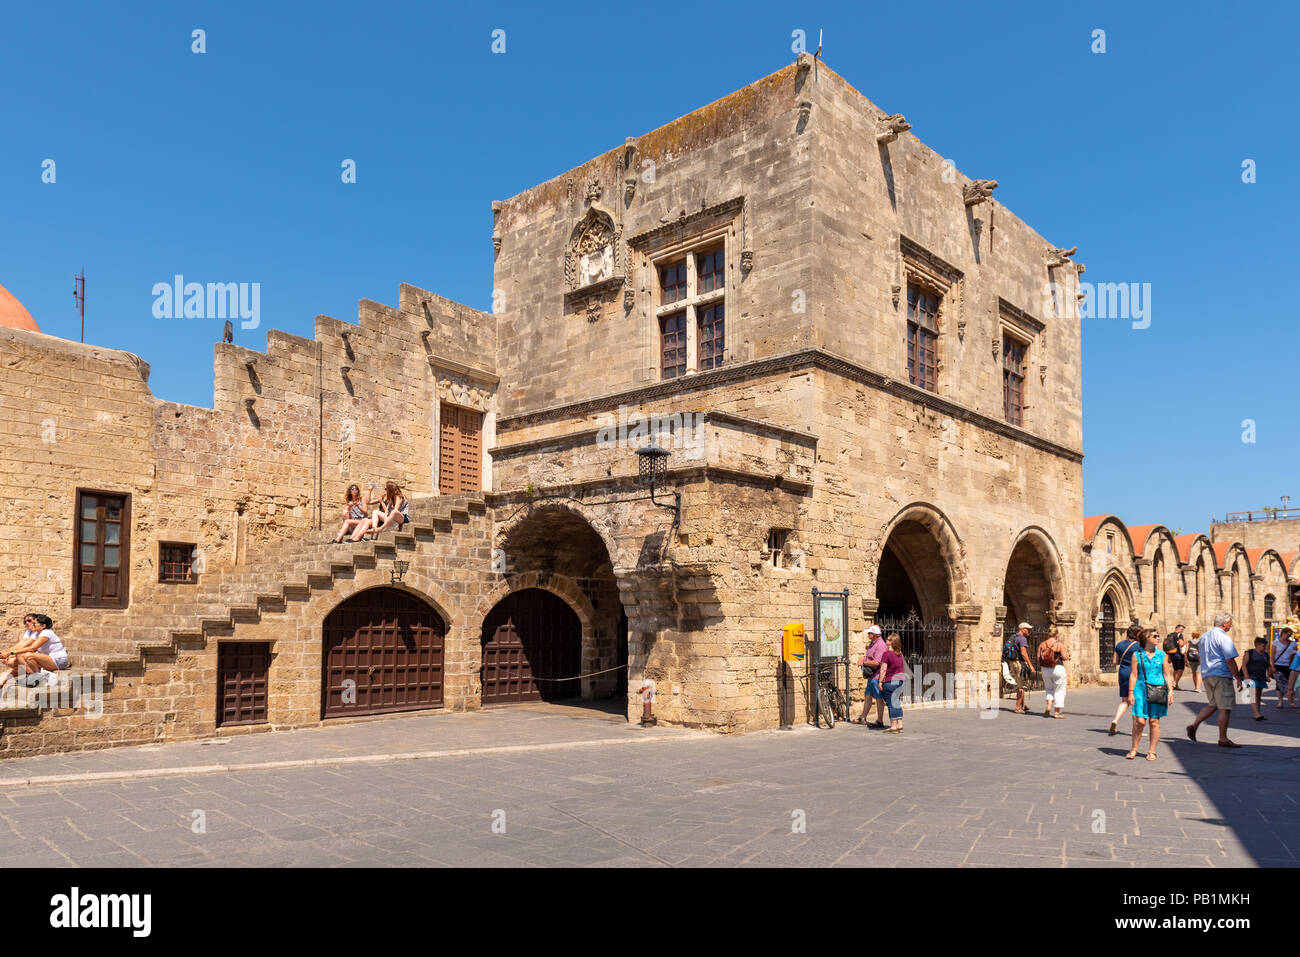 RHODES, GREECE - May 13, 2018: The historic Castellania in Rhodes Town, Knight's court, Rhodes Island, Greece Stock Photo